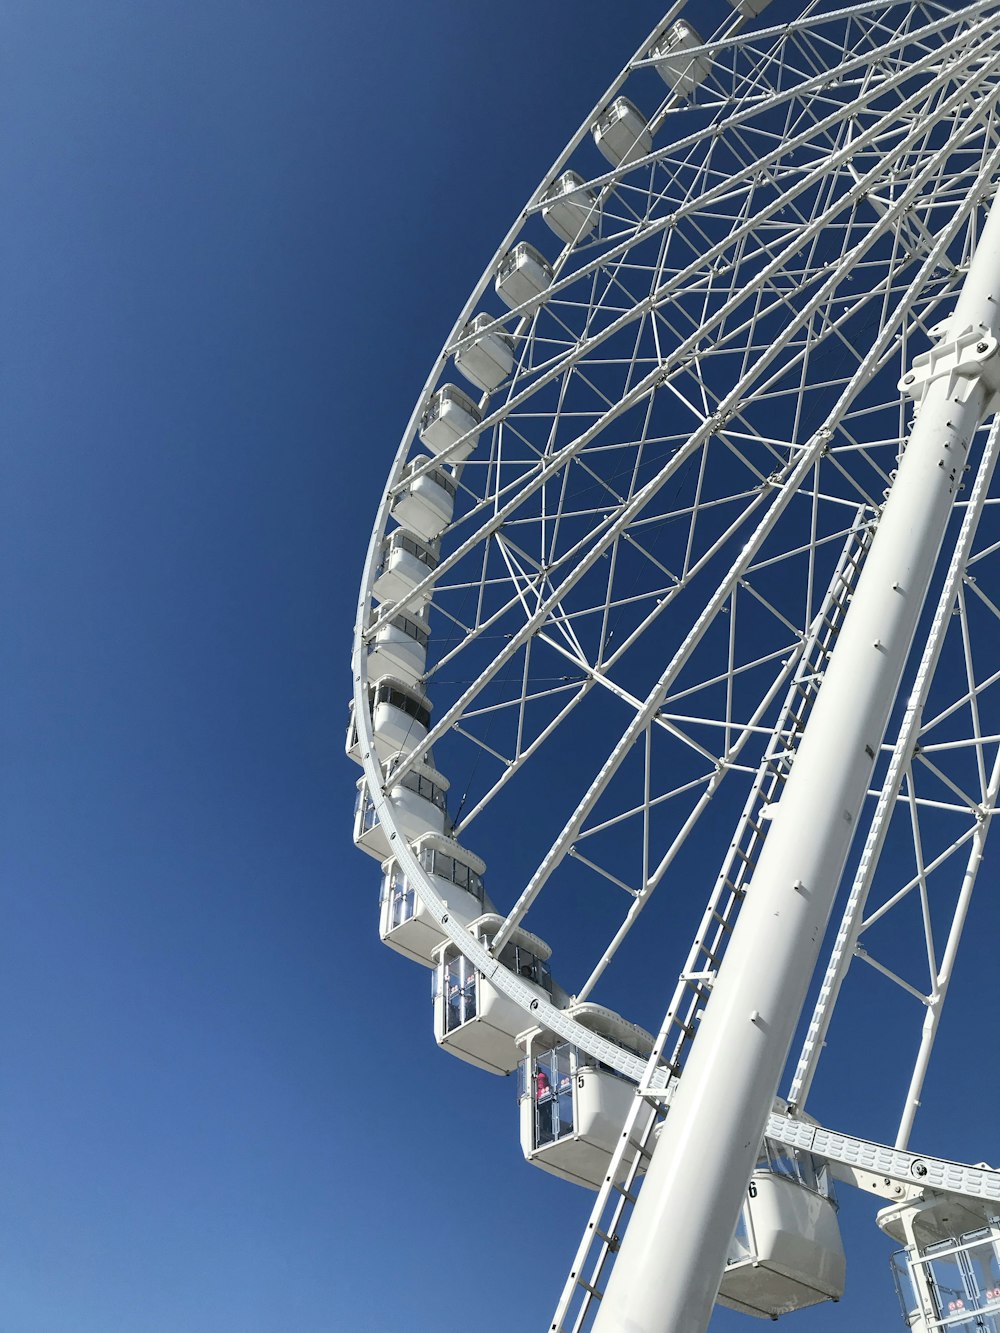 low-angle photography of Ferris wheel during daytime